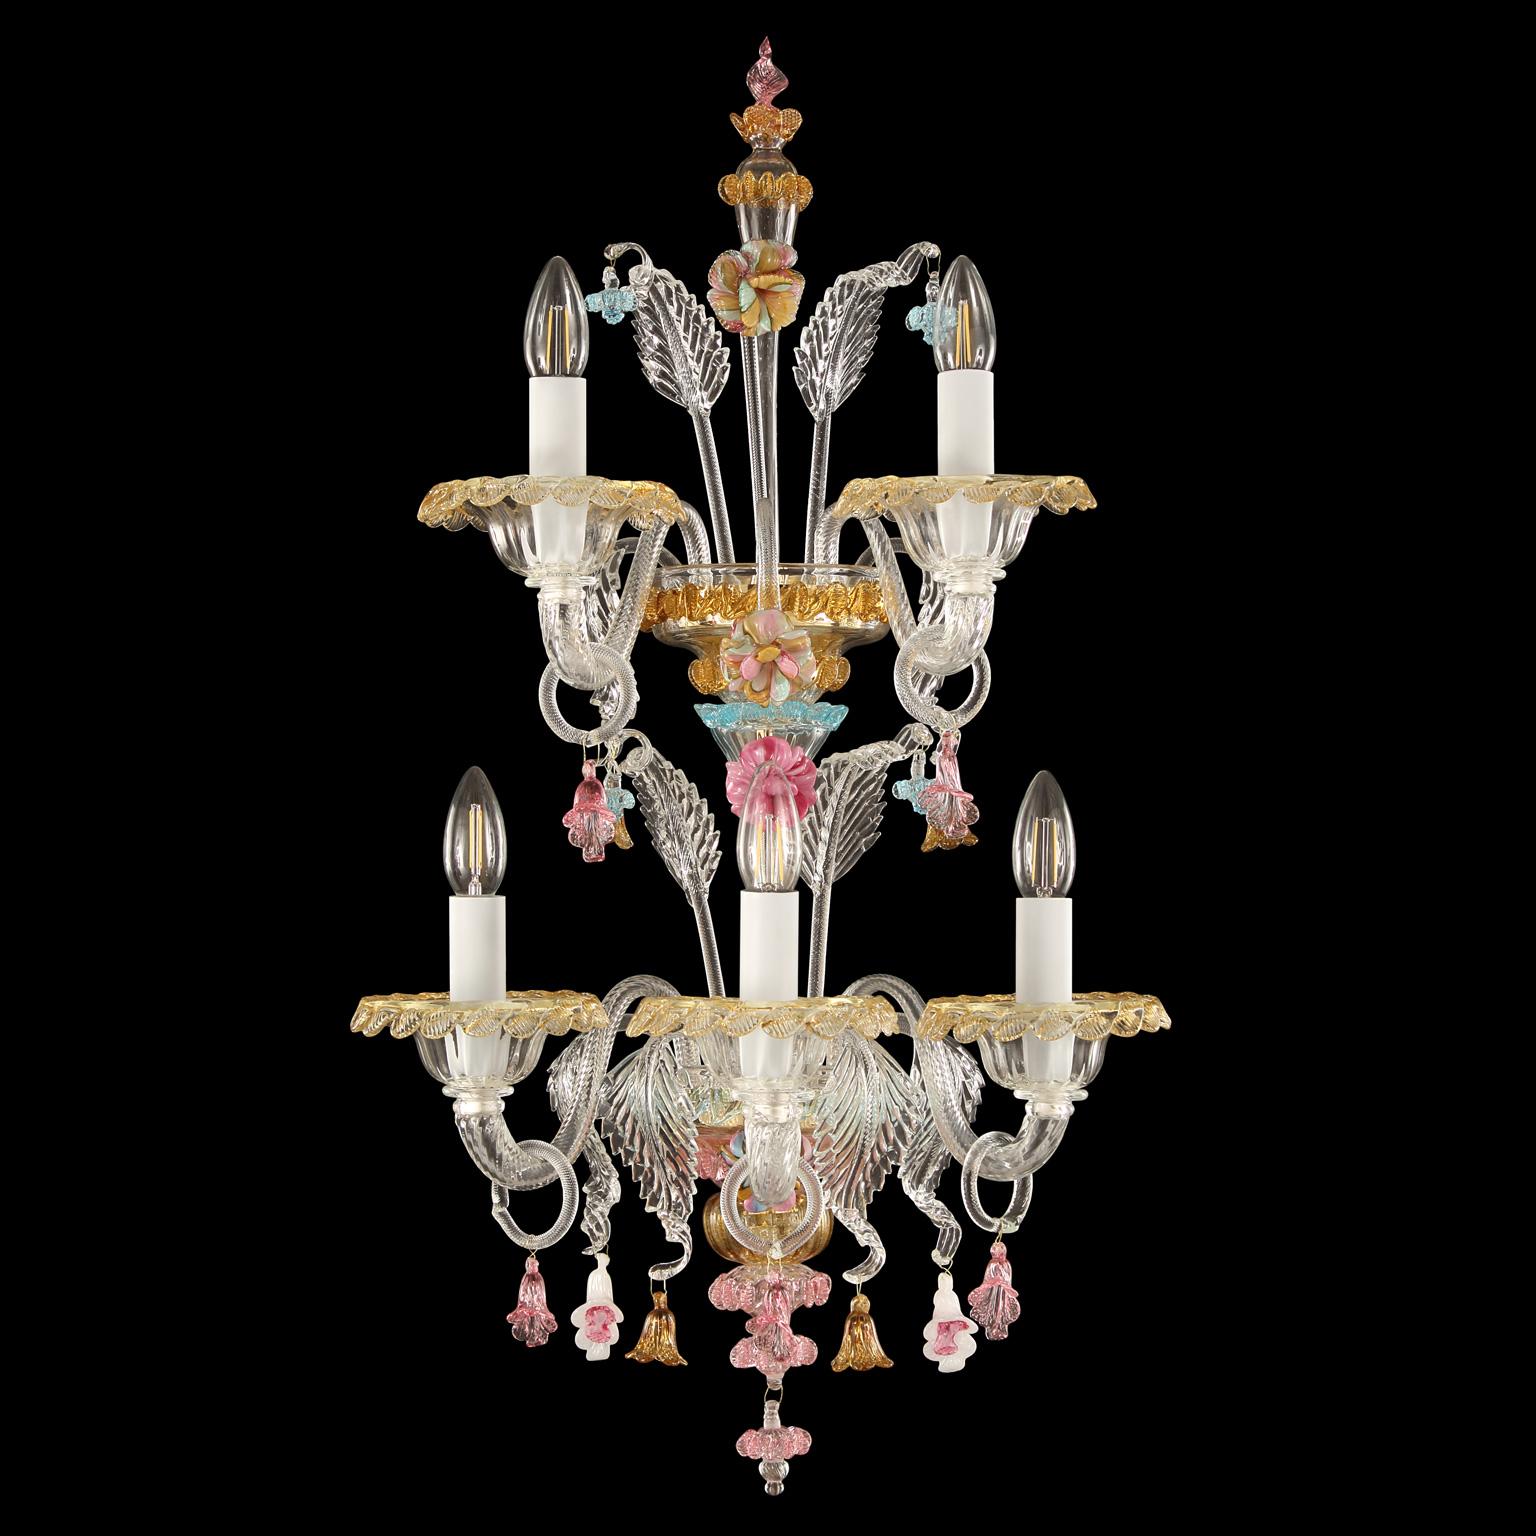 Toffee sconce 3+2 clear and multi-color Murano glass by Multiforme.

The artistic glass collection Toffee is an elegant and delicate lighting work. The structure is a combination of well-proportioned volumes that creates a refined sconce.
It is